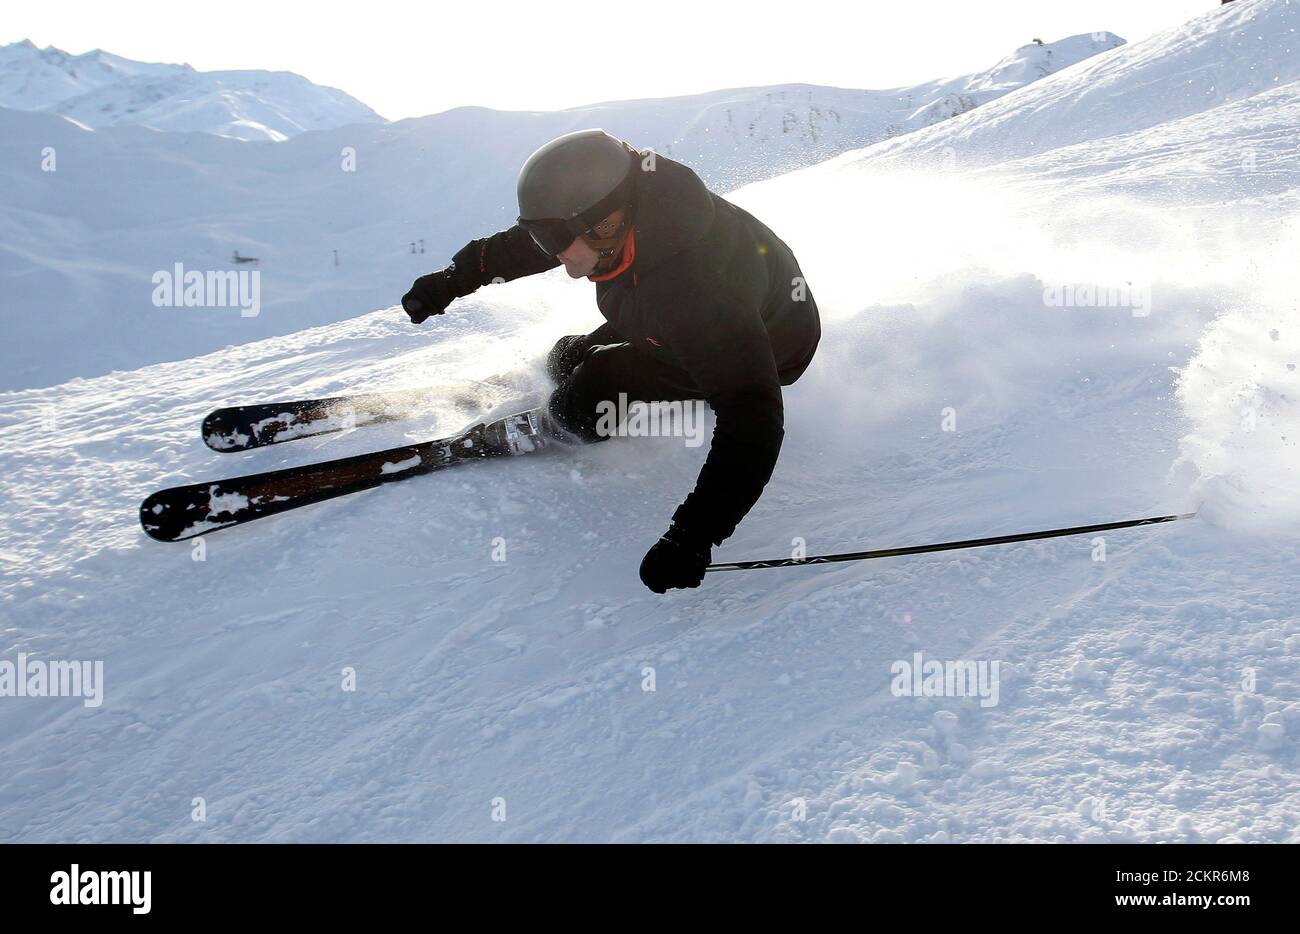 Simon Jacomet, ski designer and founder of Swiss ski producer Zai races  down a piste to test a pair of Zai skis in the central Swiss town of  Disentis February 4, 2010.